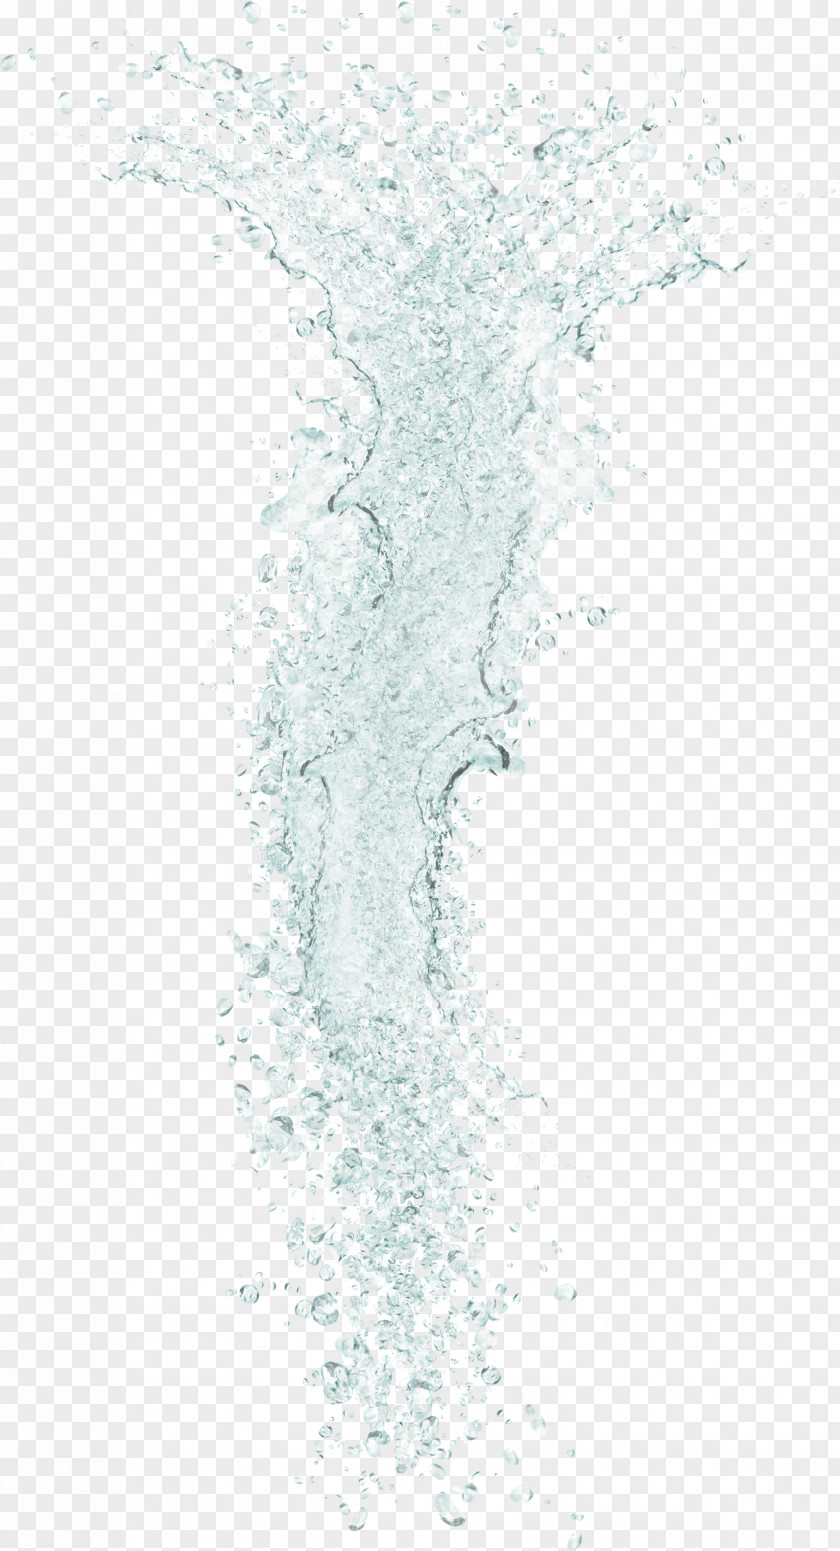 Green Fresh Water Effect Elements PNG